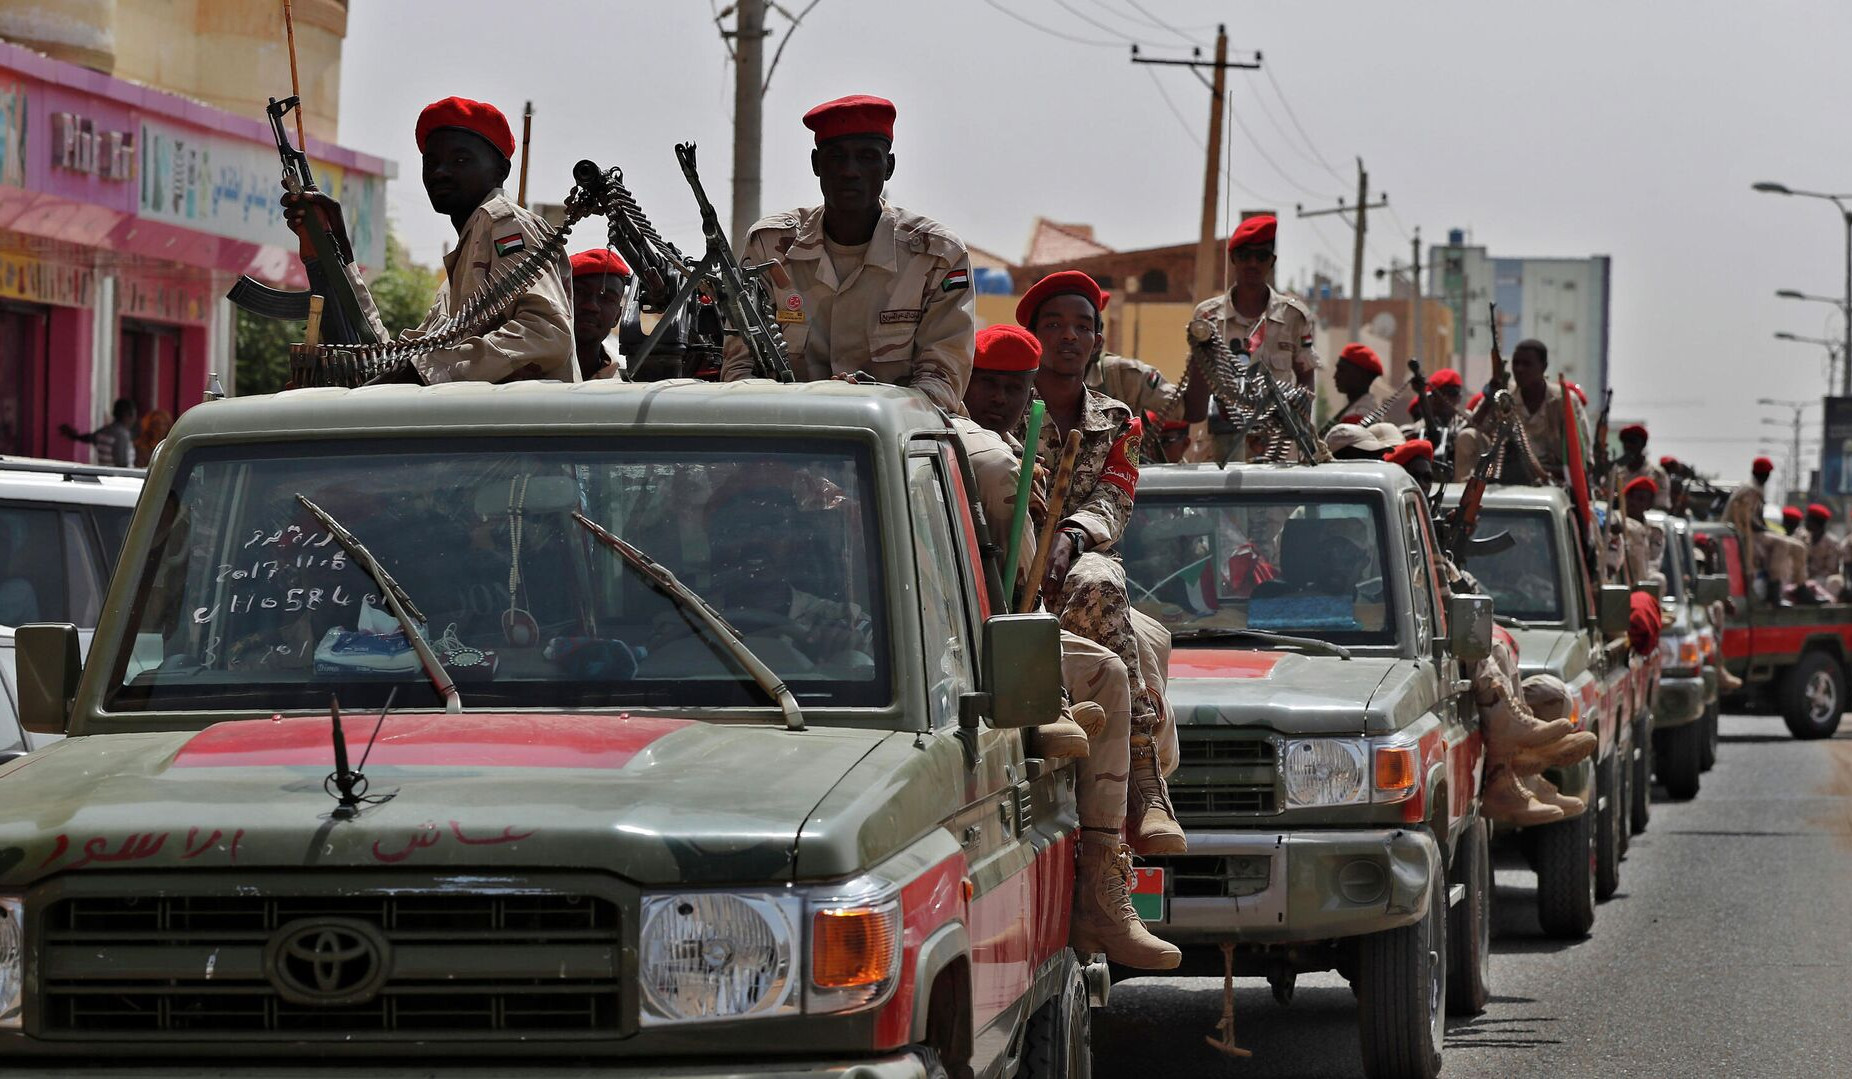 Sudan paramilitary RSF to attend Jeddah talks with armed forces